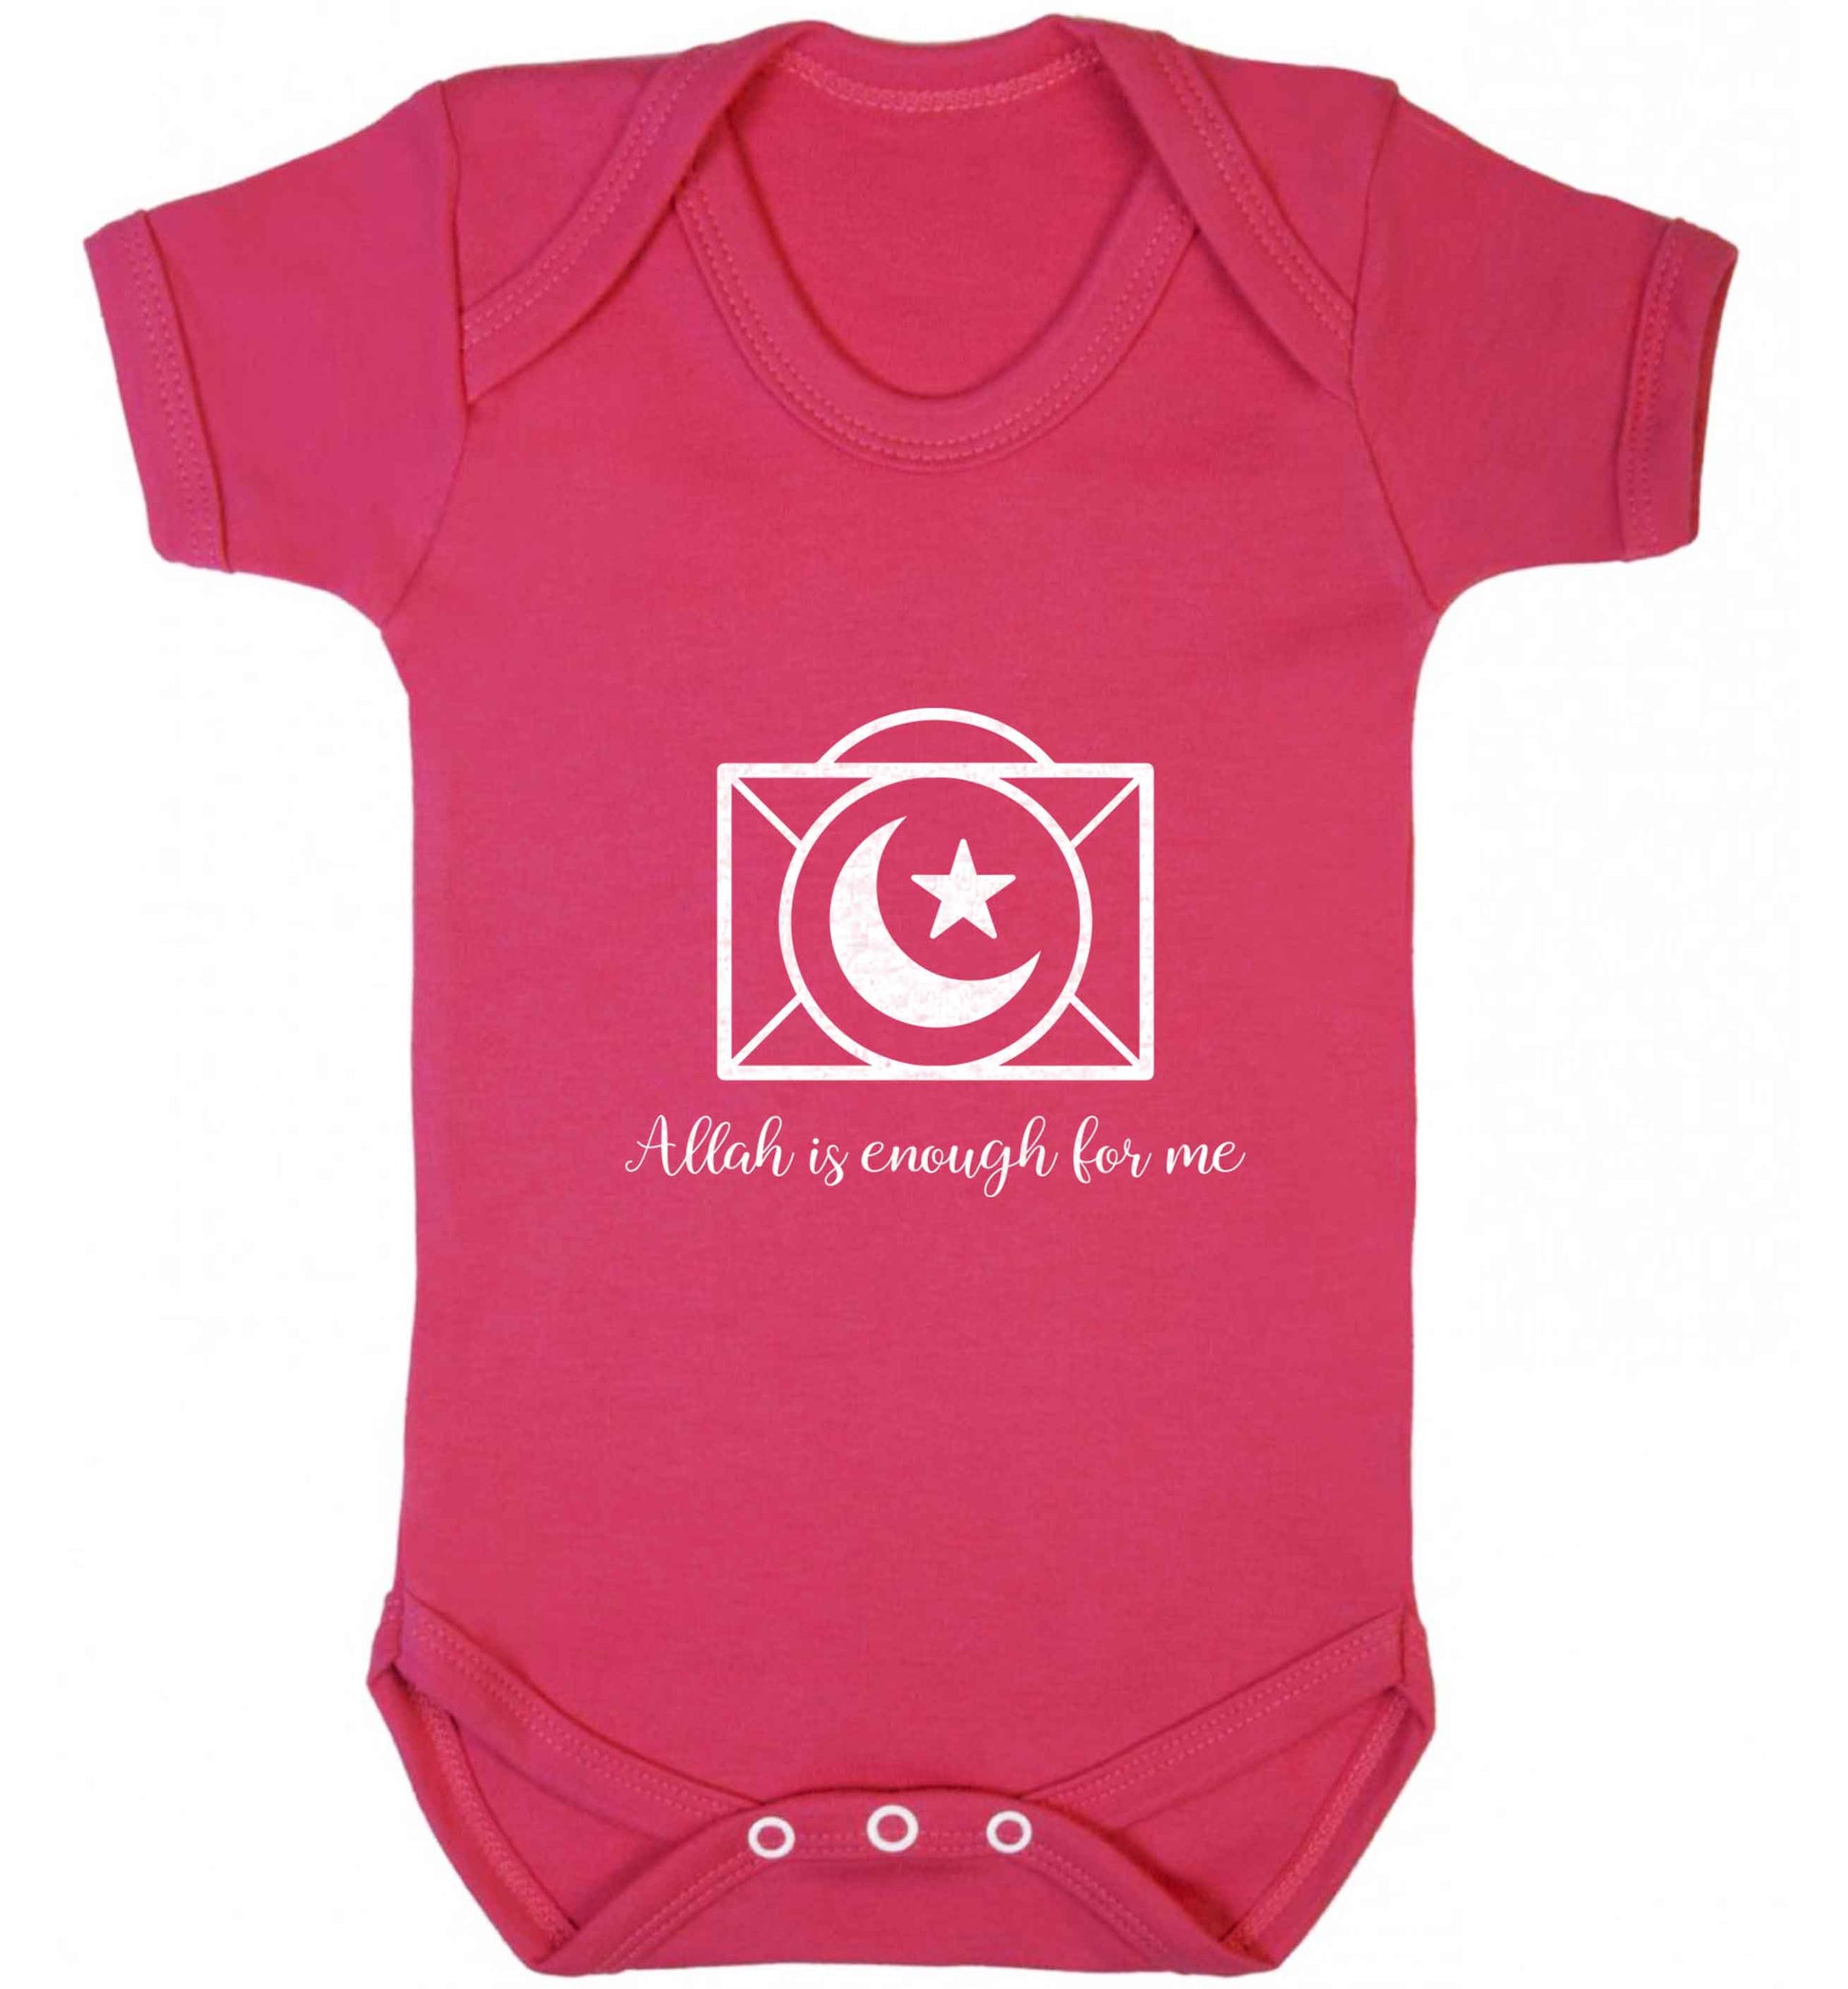 Allah is enough for me baby vest dark pink 18-24 months